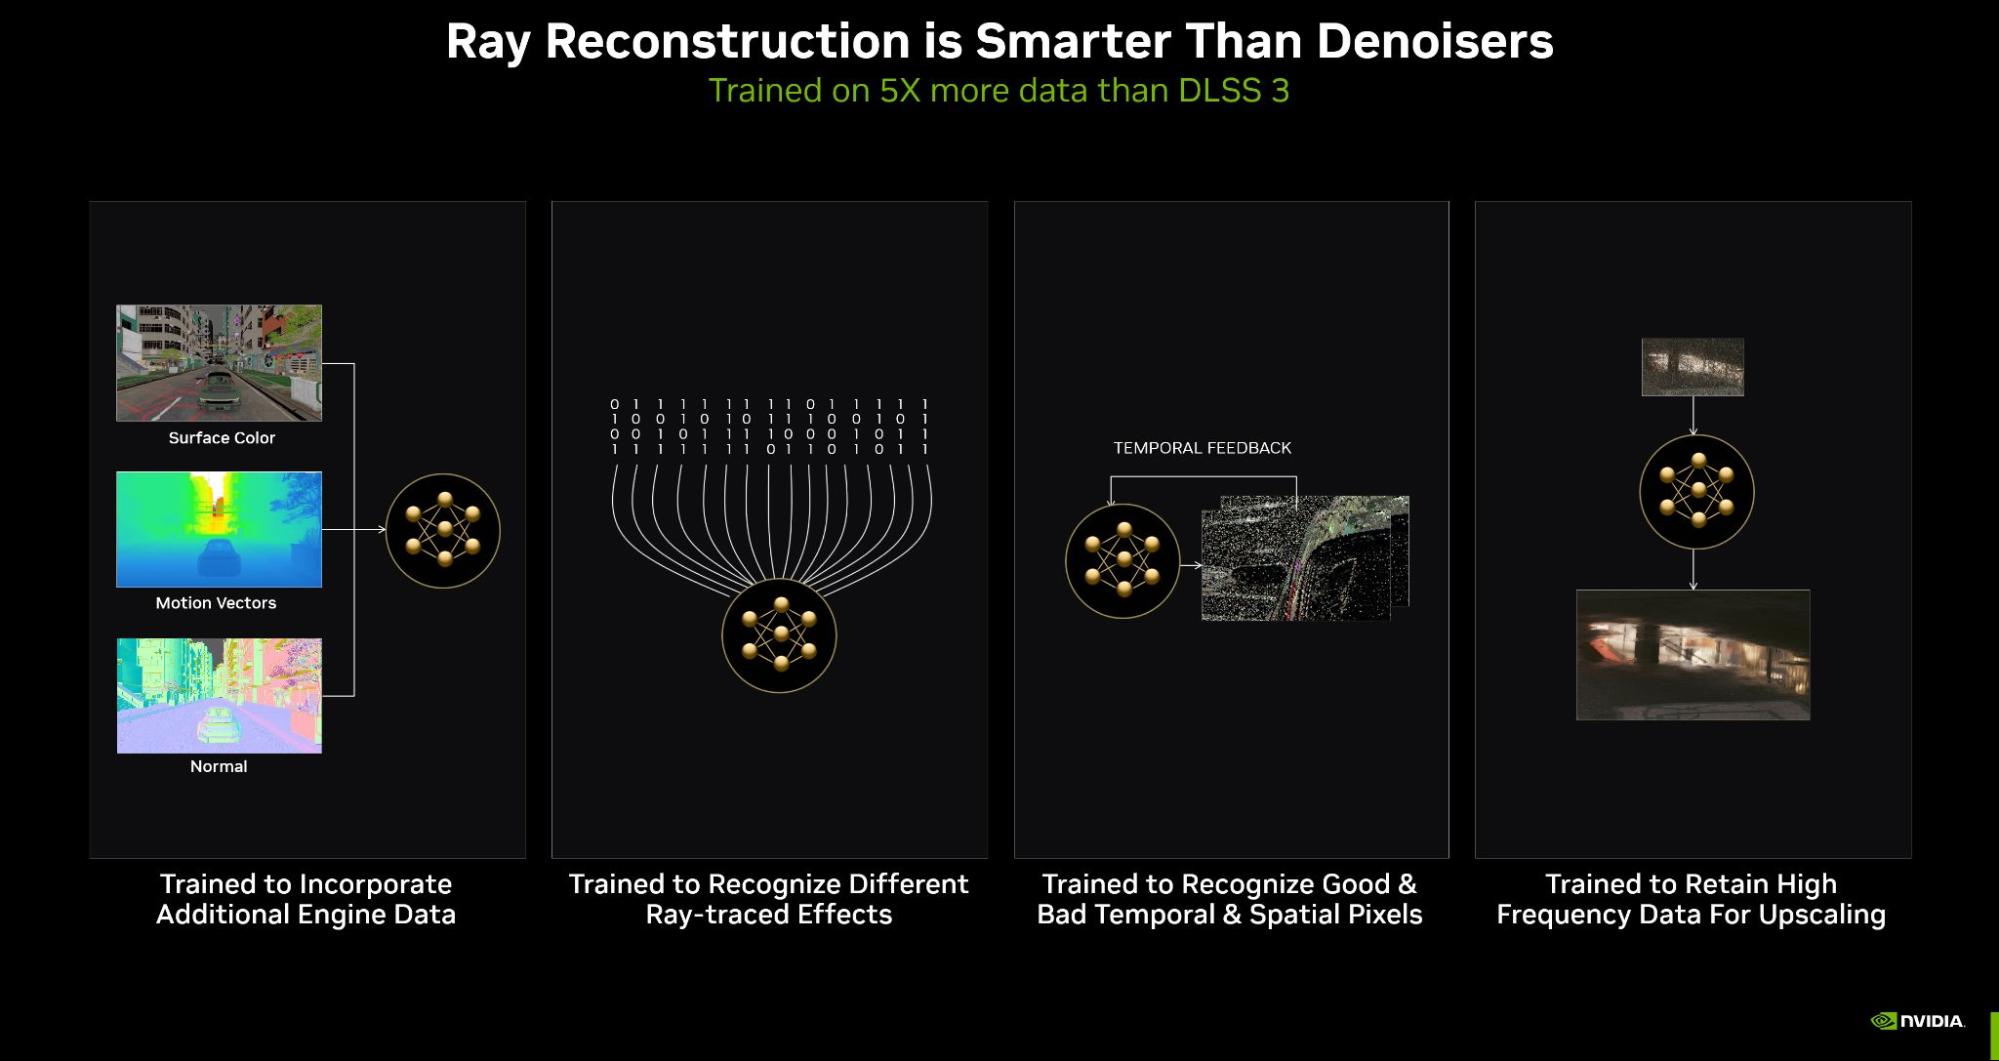 Graphic with icons and text explaining how Ray Reconstruction is trained to incorporate additional engine data, recognize different ray traced effects, identify which pixels to use (temporally or spatially), and retain high-frequency data for upscaling.